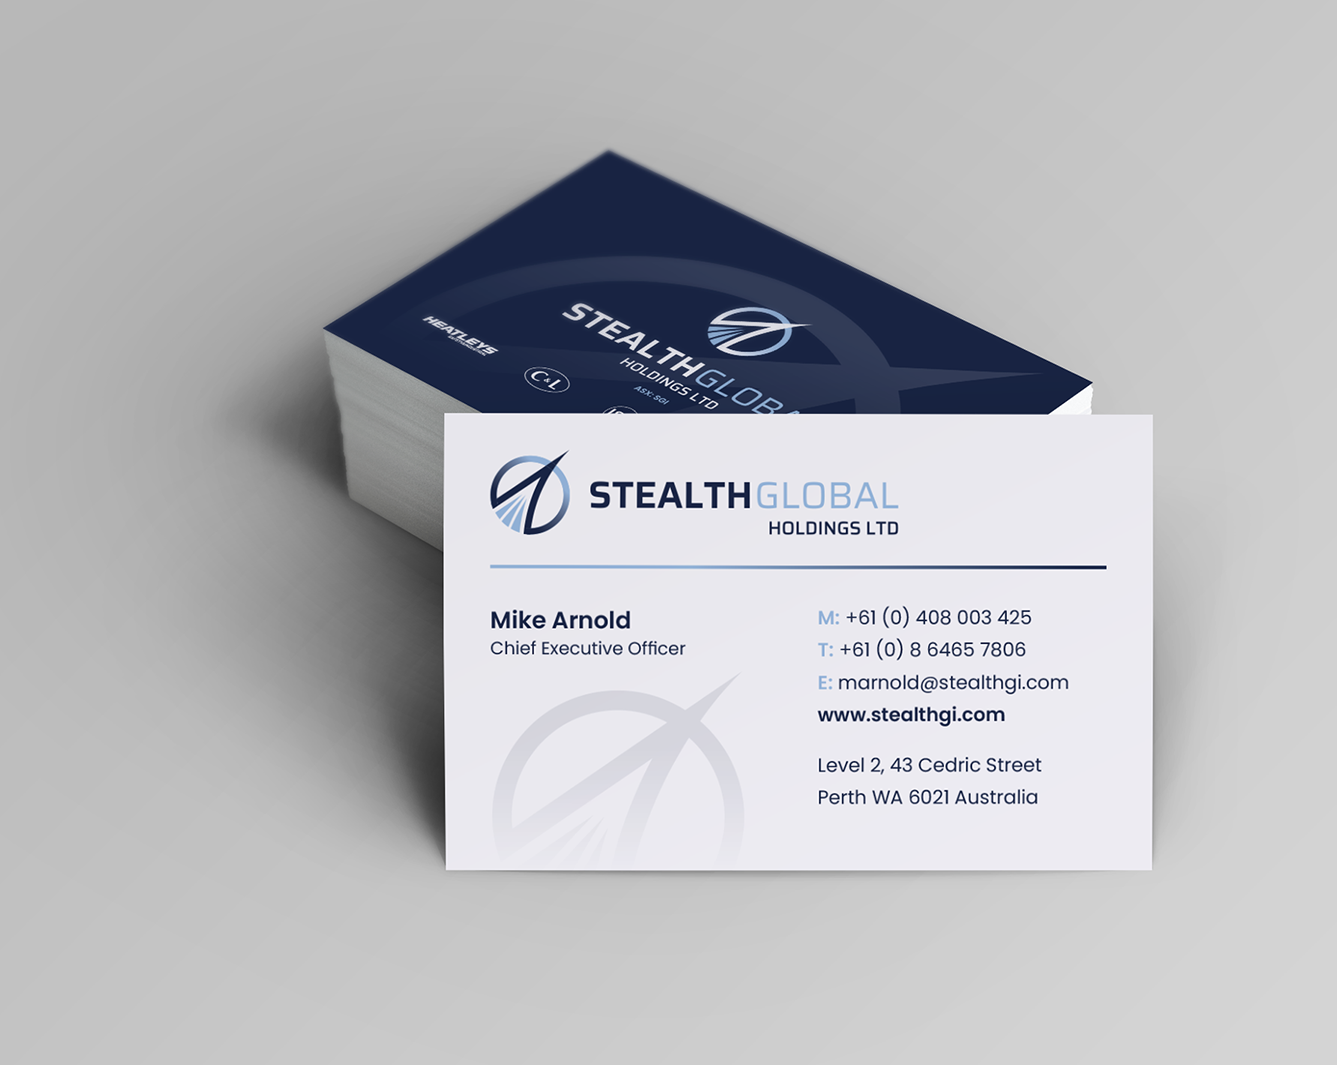 BEVIN CREATIVE – Stealth Global Business Card